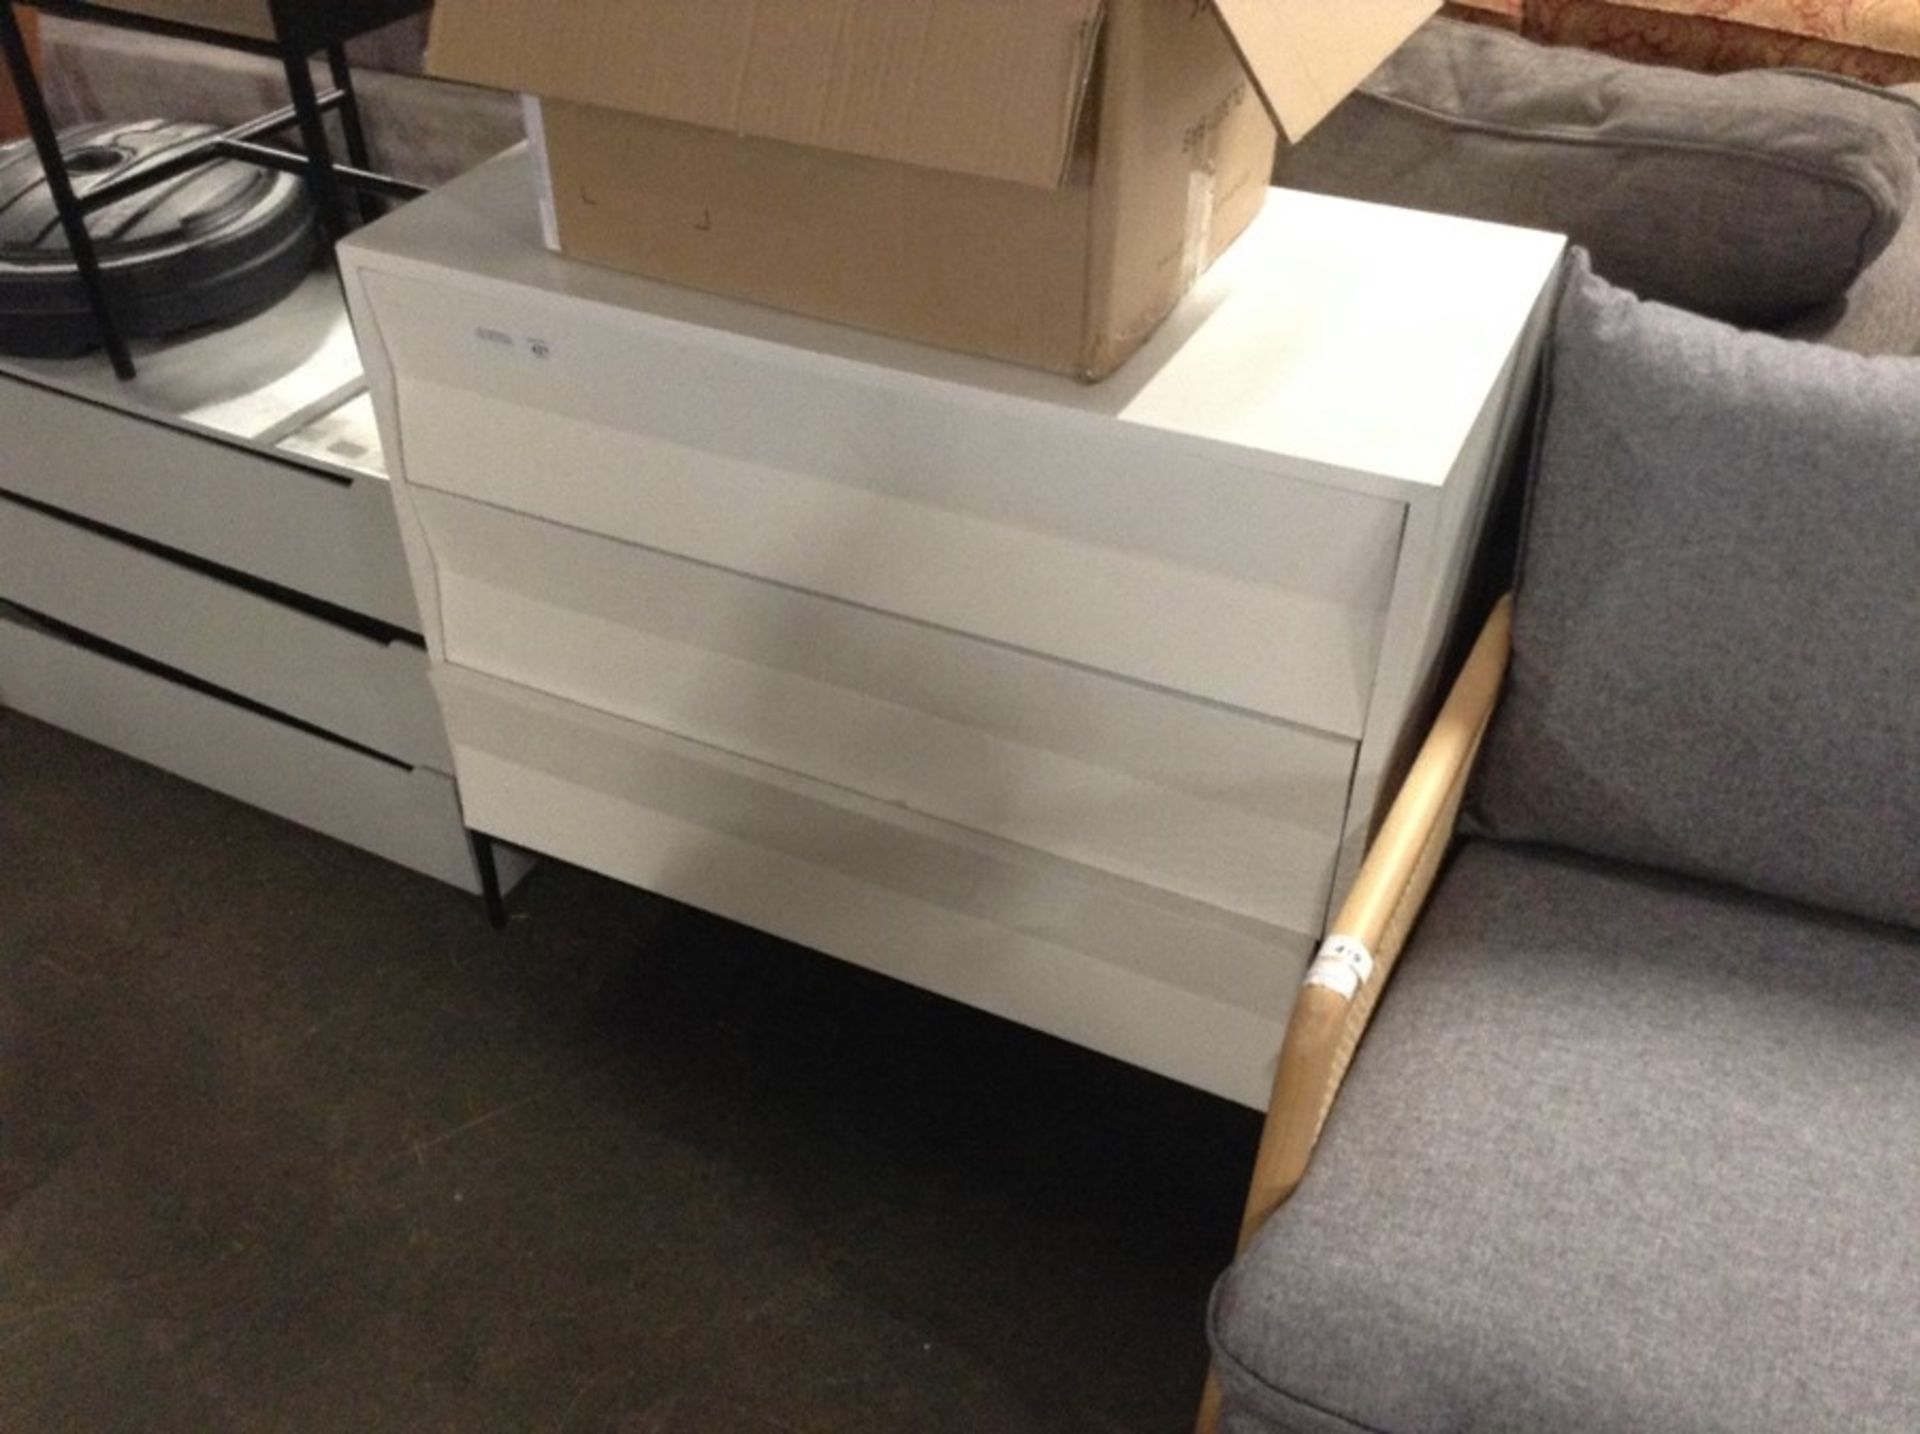 | 1x | Hohner Chest of Drawers in White | RRP £499| hohnerchestthreedramdf-BER